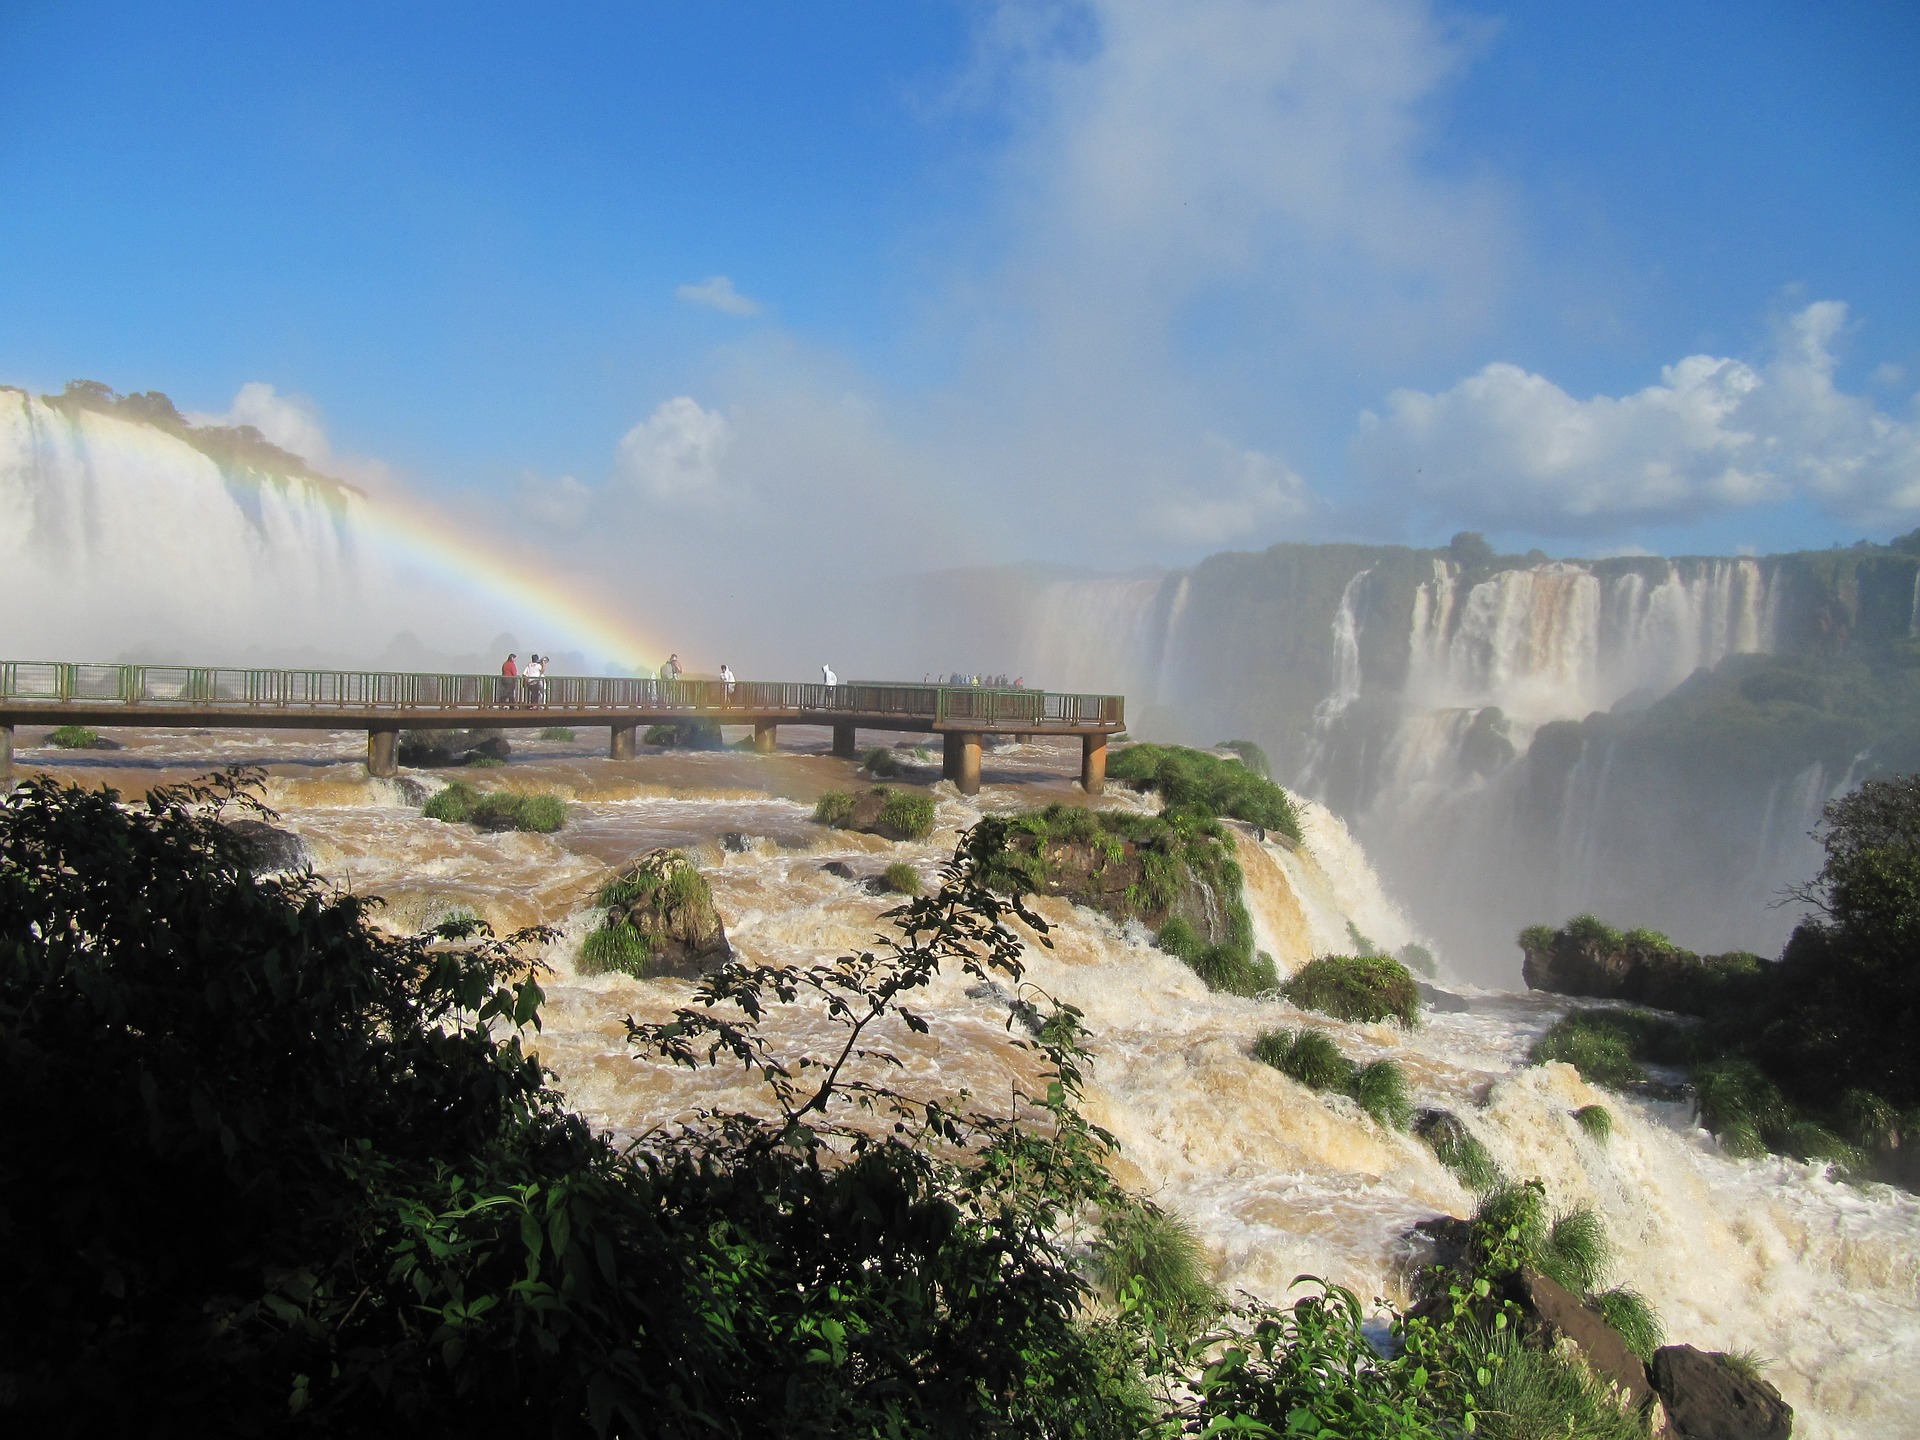 Iguazu Falls – One of the seven natural wonders of the world